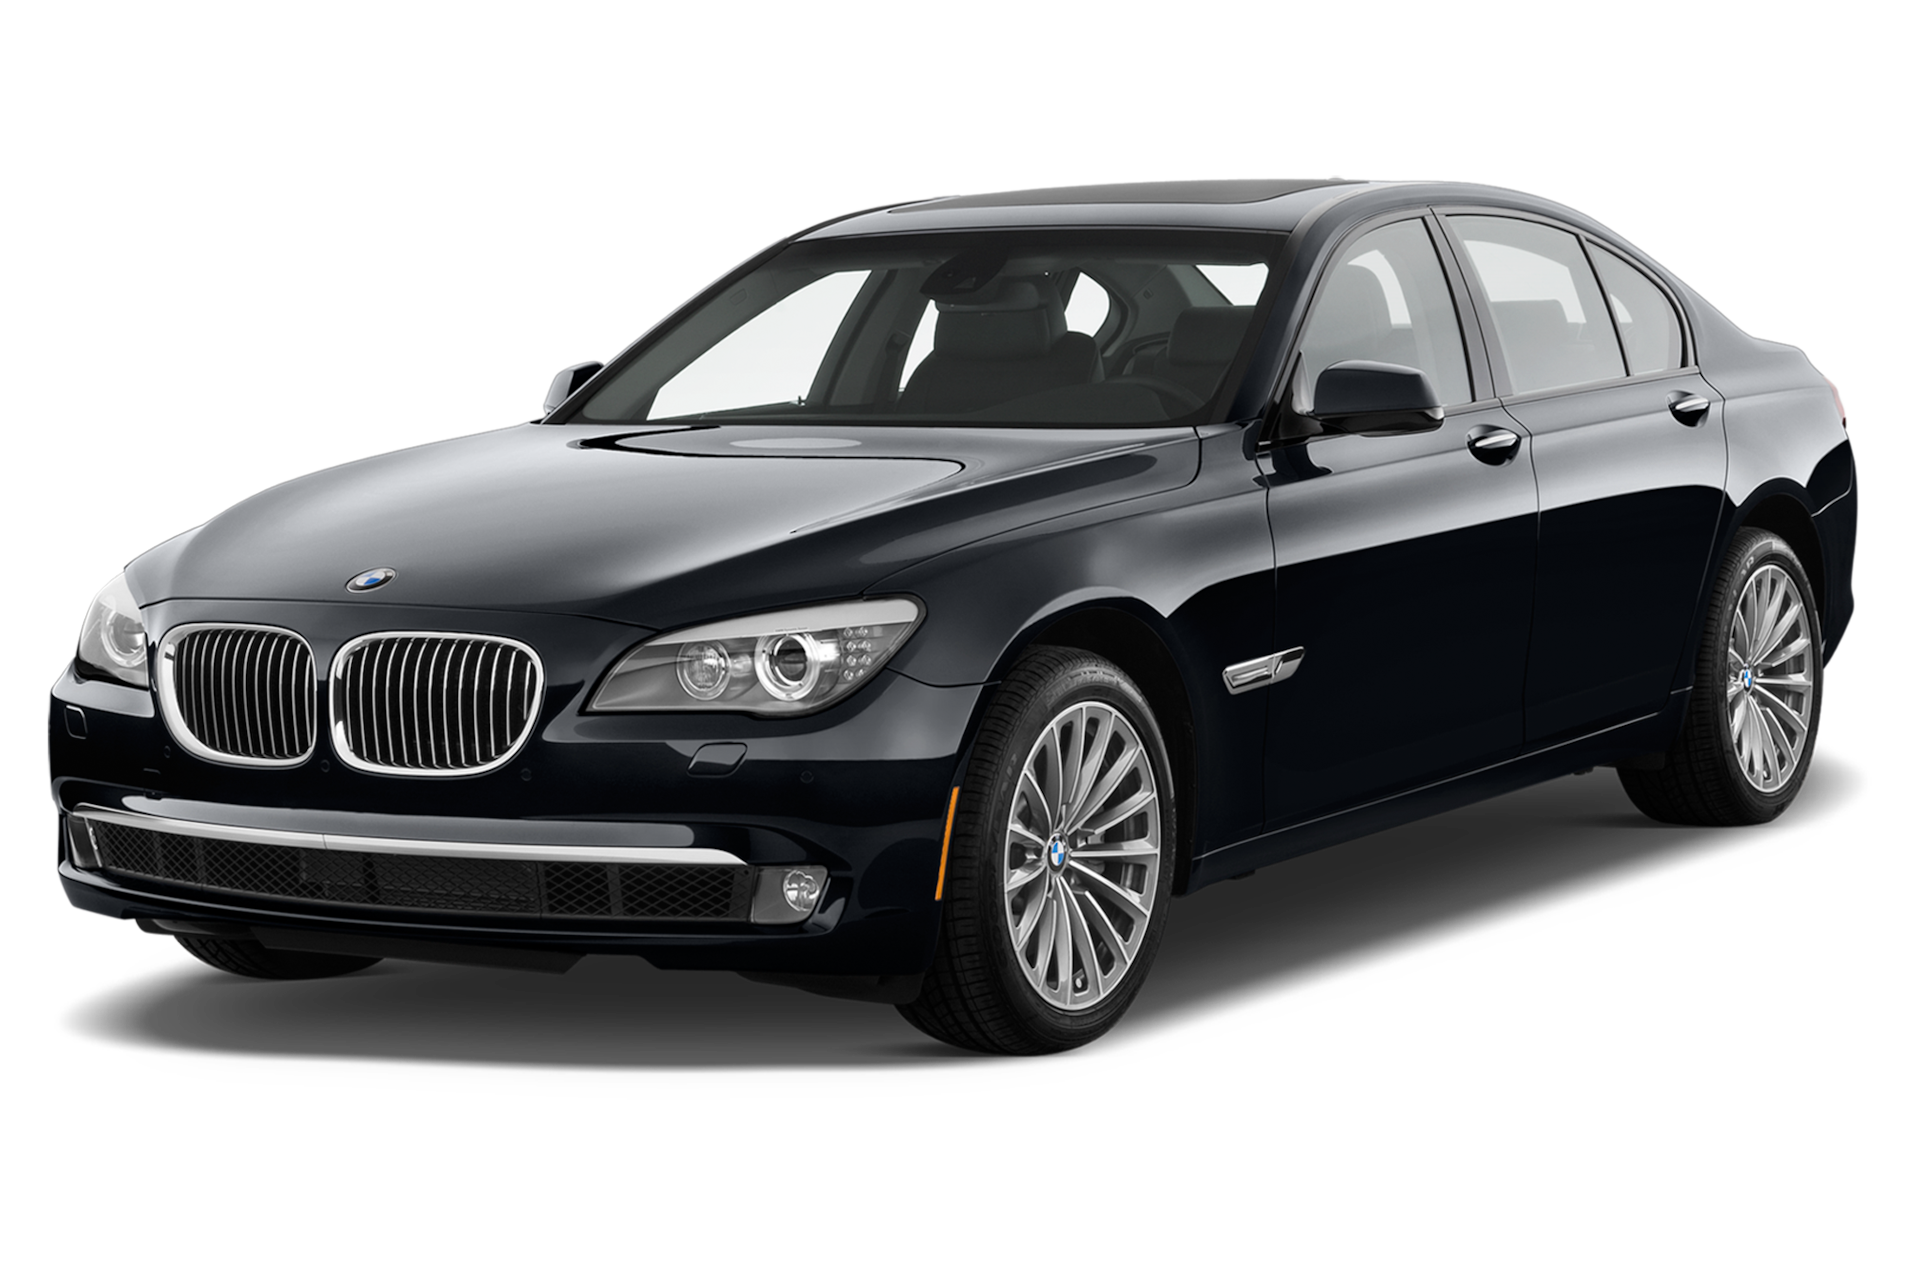 2012 BMW 7-Series Prices, Reviews, and Photos - MotorTrend